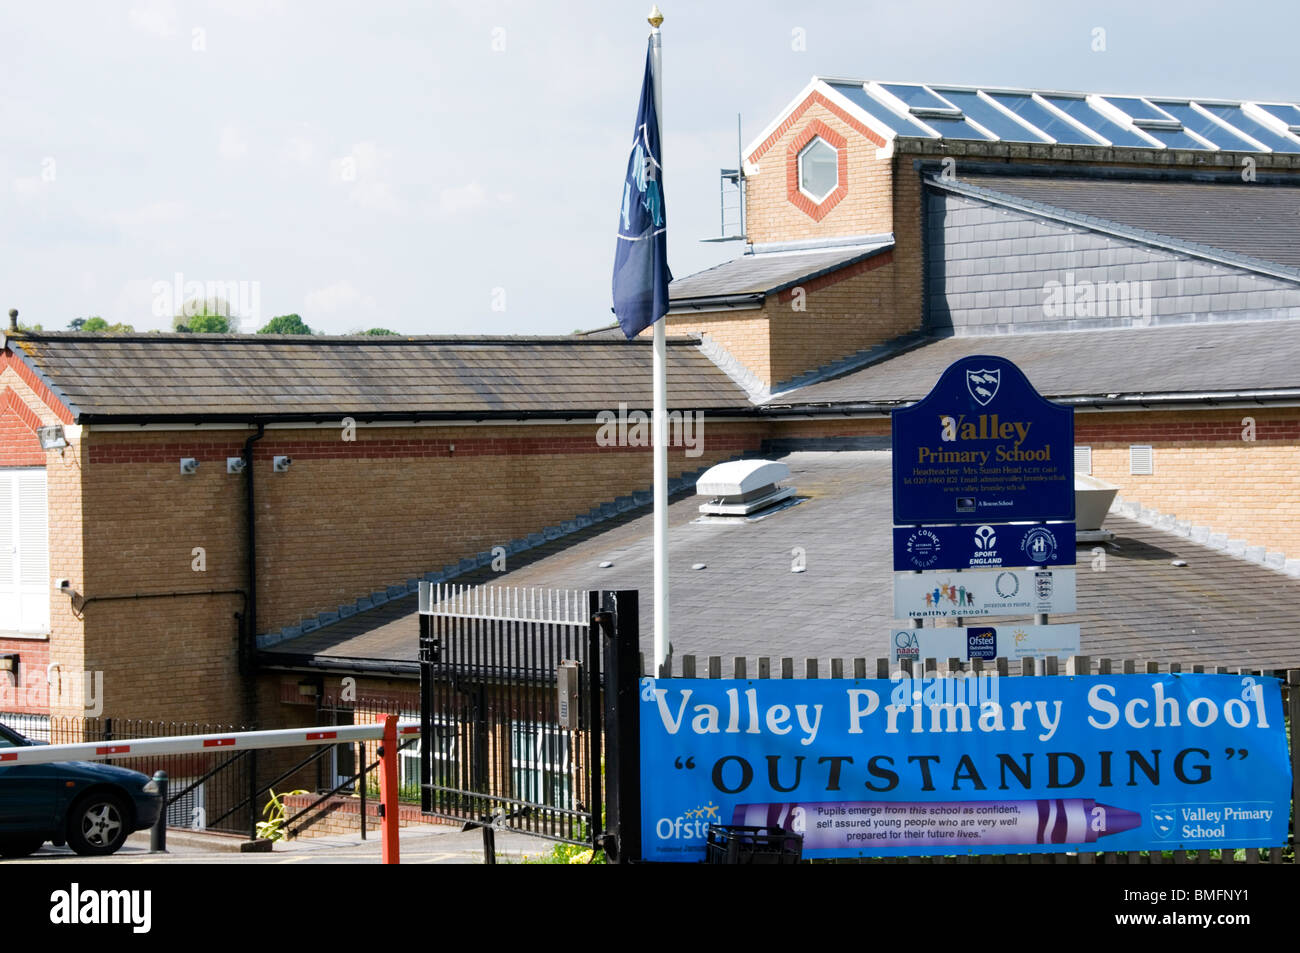 Valley Primary School, Shortlands, Bromley, Kent, England - ranked Outstanding by Ofsted Stock Photo